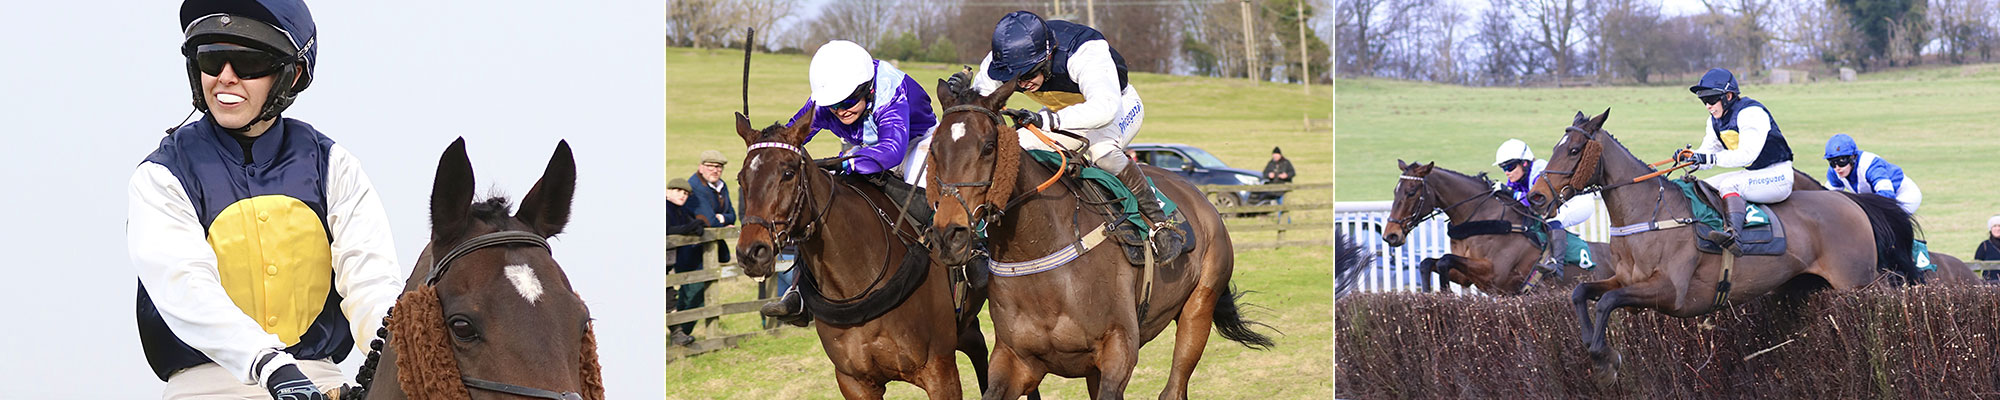 Point to Point Horse Racing in Cheshire